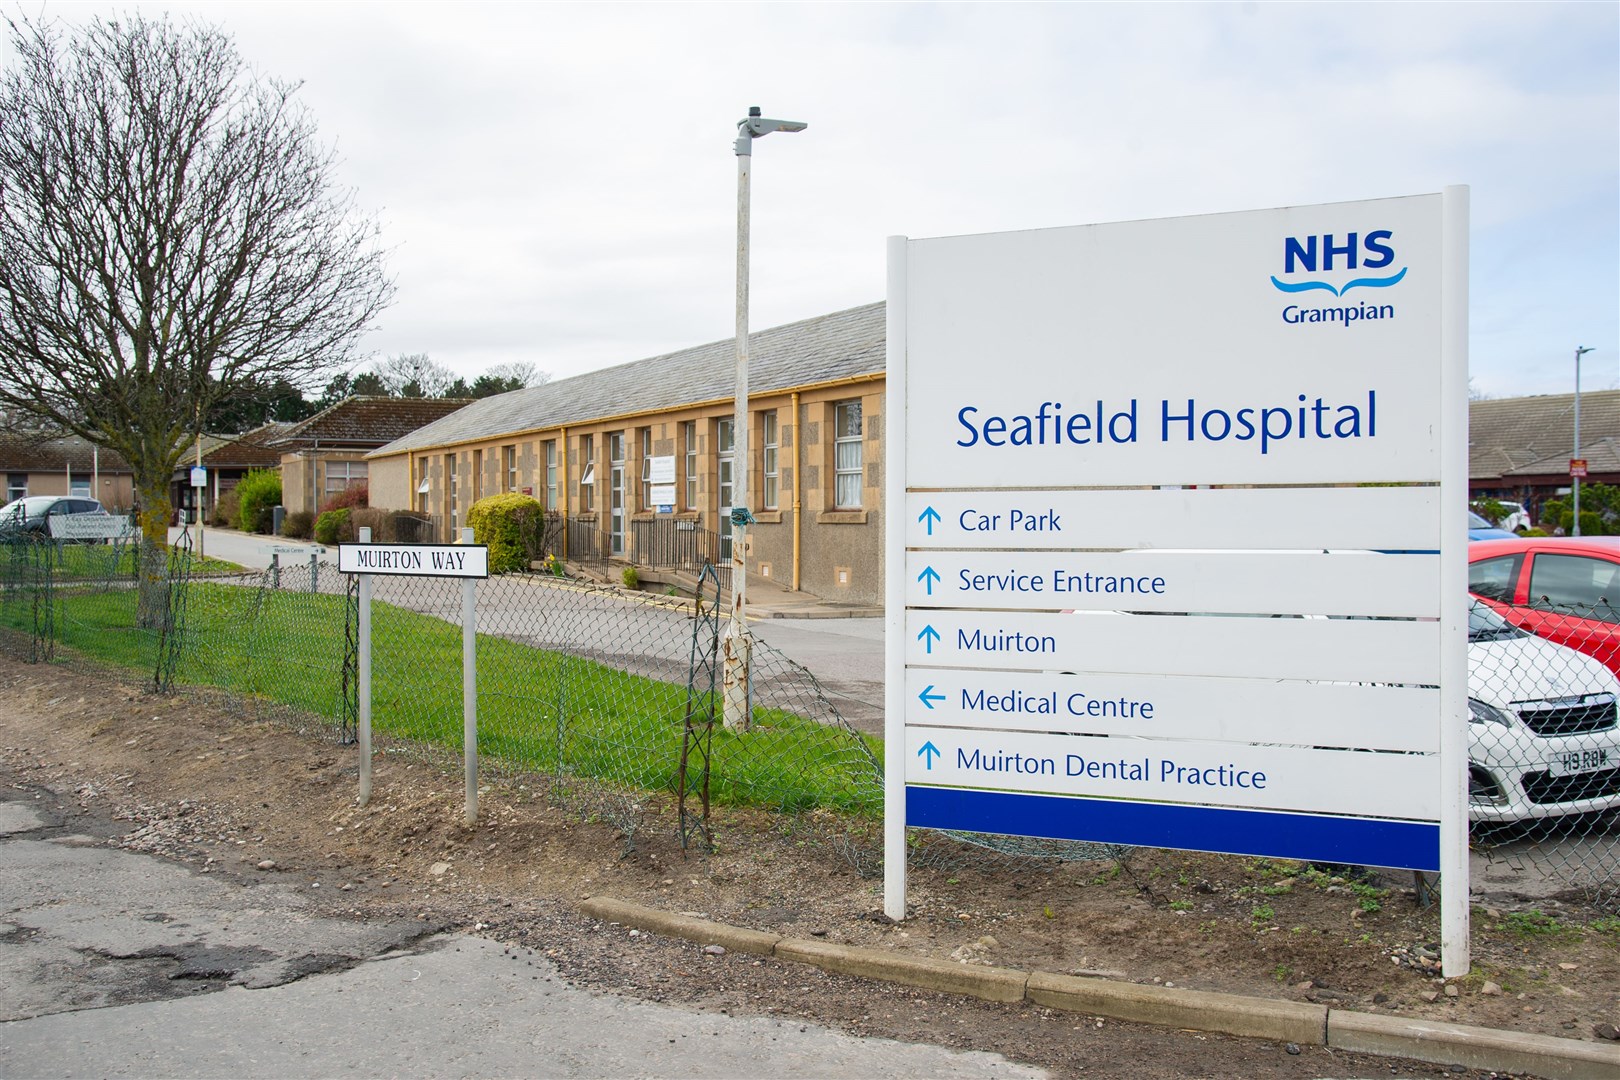 Seafield Hospital will be playing host to the Mobile Breast Screening Unit.